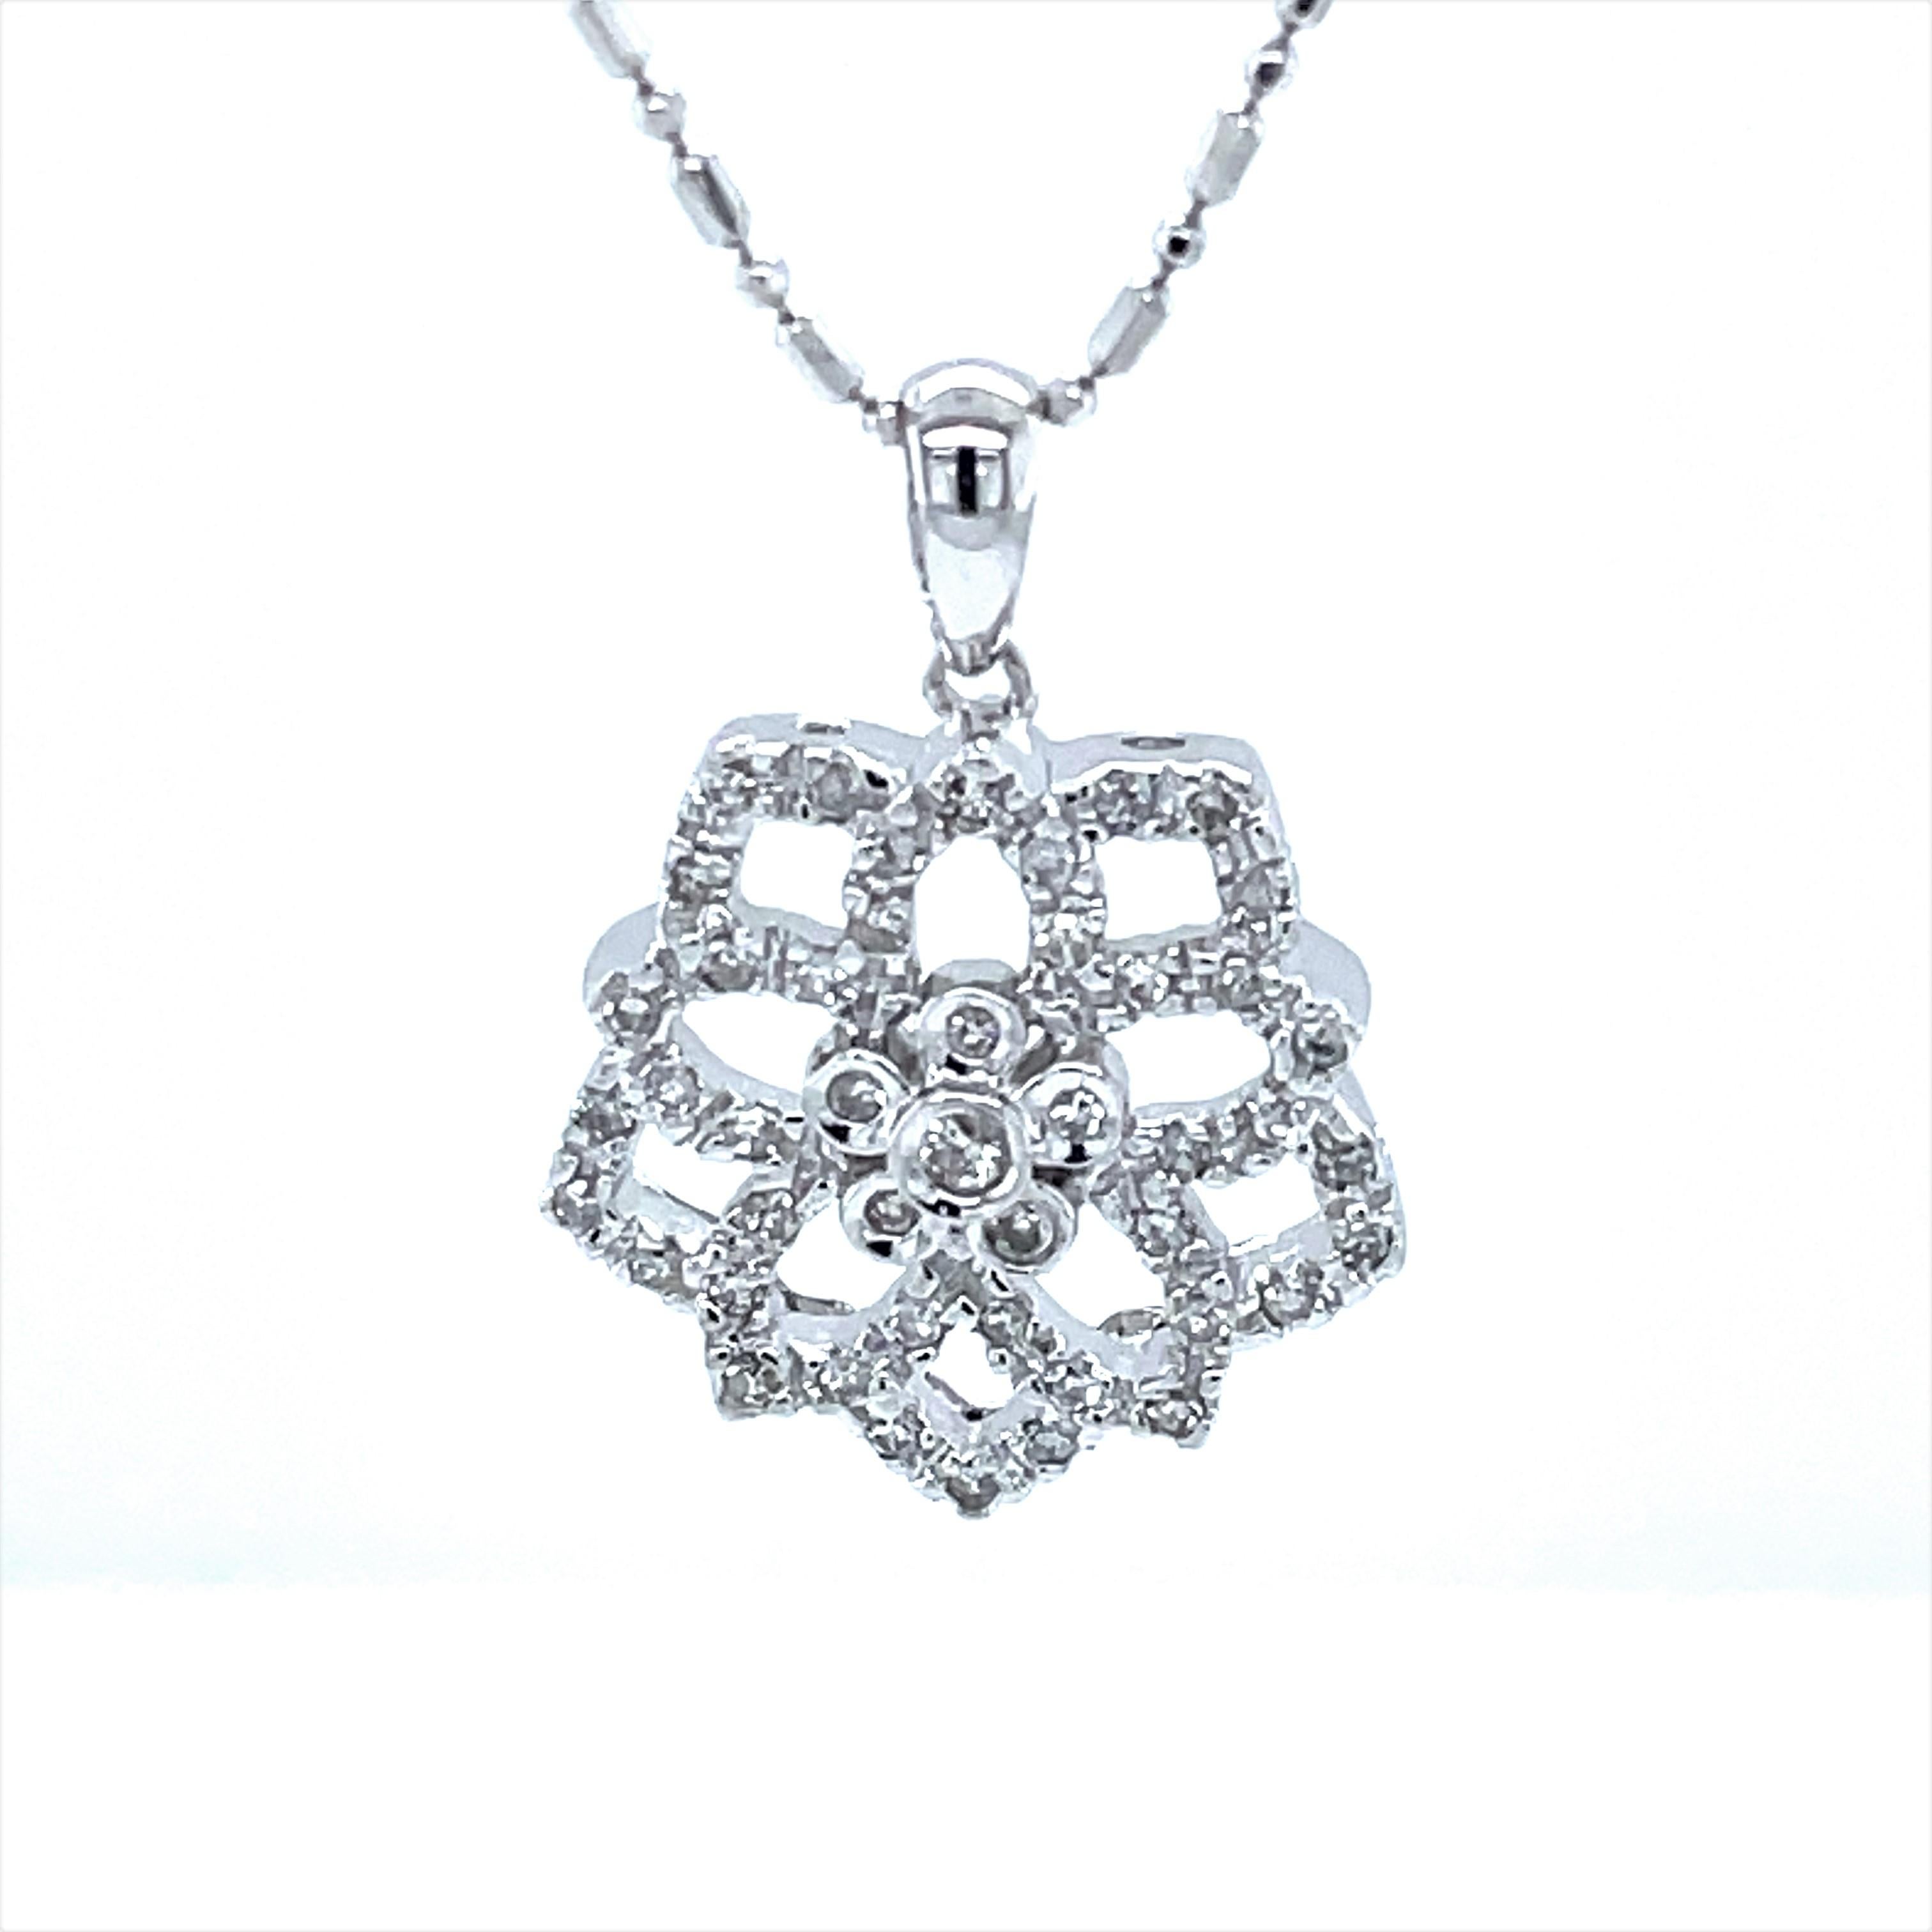 In 14 karat white gold, .22 carats TW of H/ SI round full cut diamonds , 45 stones in total on this pleasing geo floral inspired pendant necklace. Suspended on a fancy 16 inch white gold faceted bead chain that glistens and adds just the right